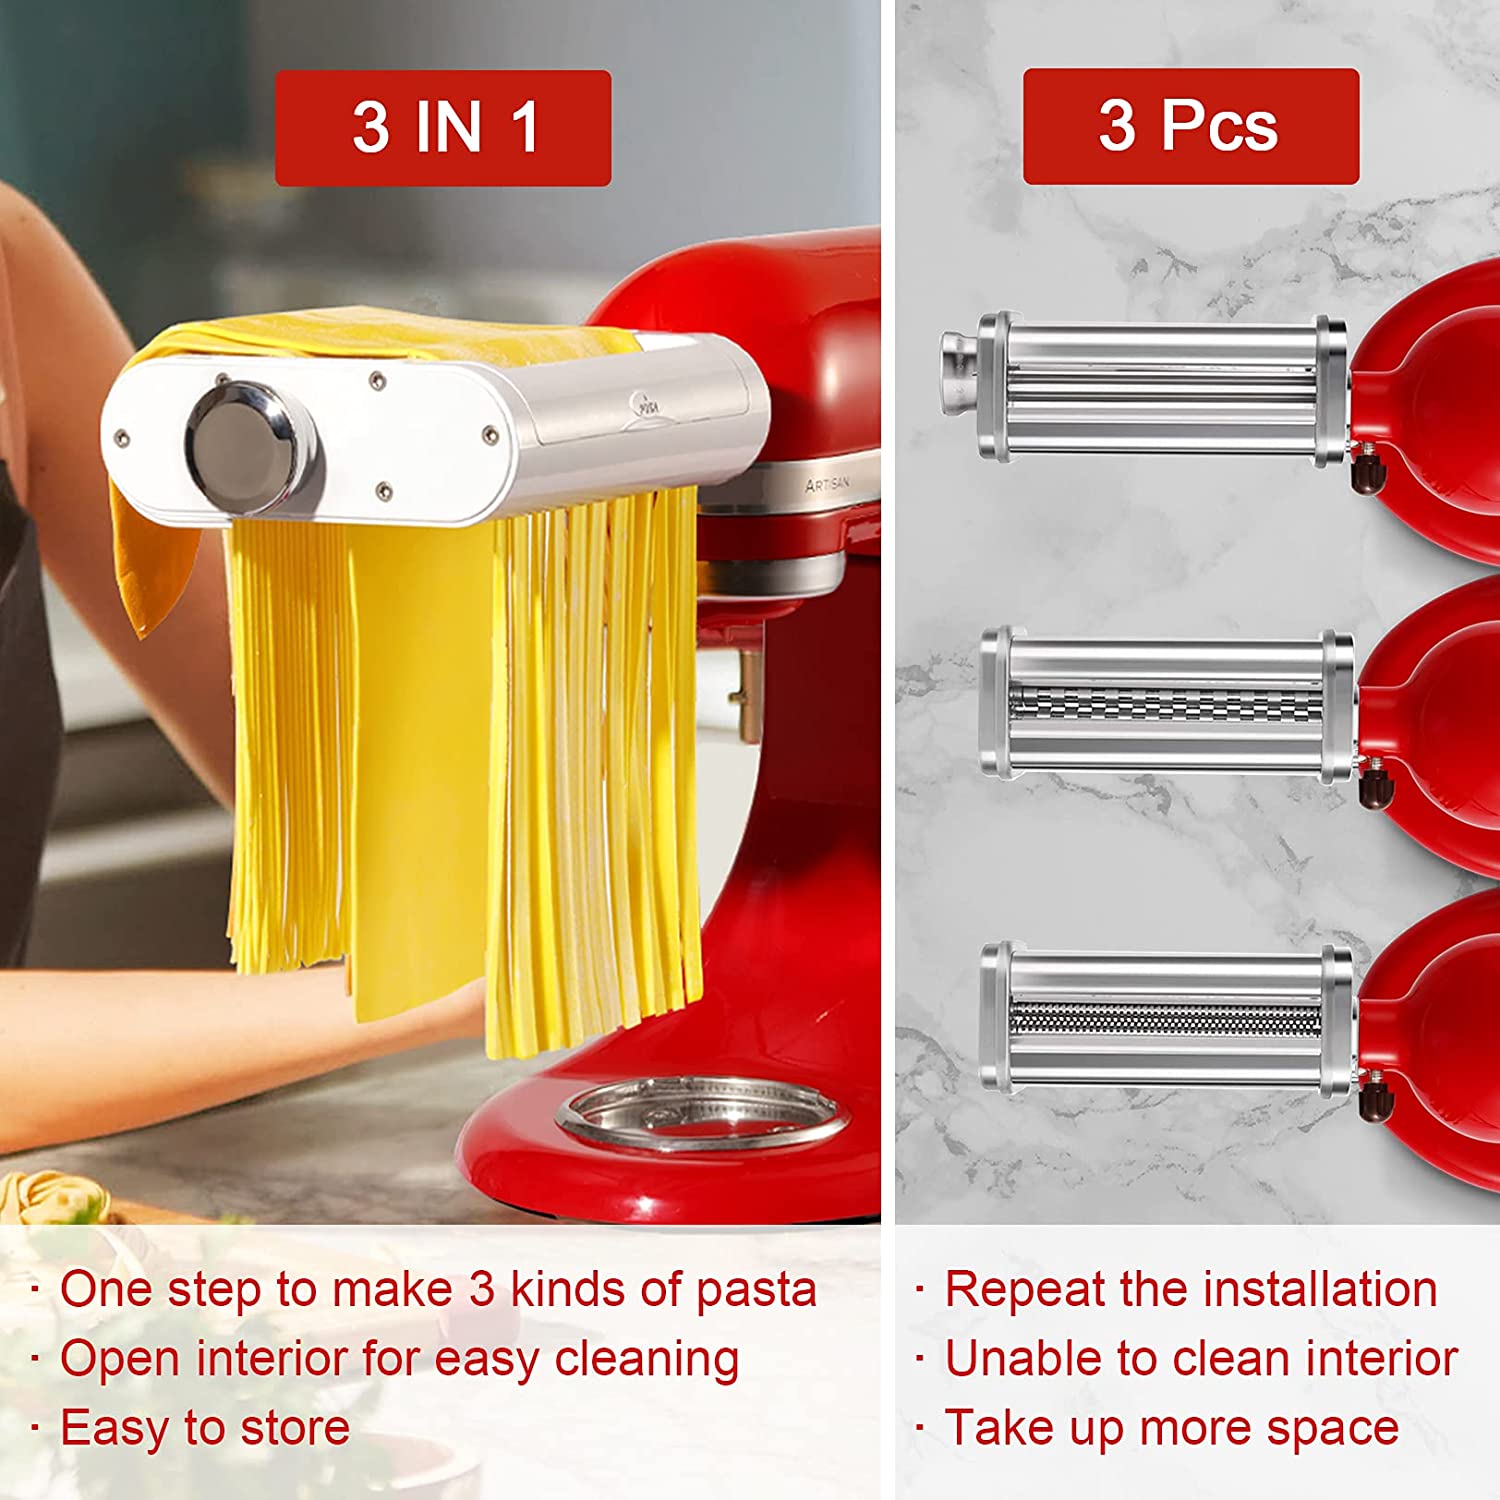 3 Piece 3 IN 1 For KitchenAid Pasta Roller Maker Stand Mixers